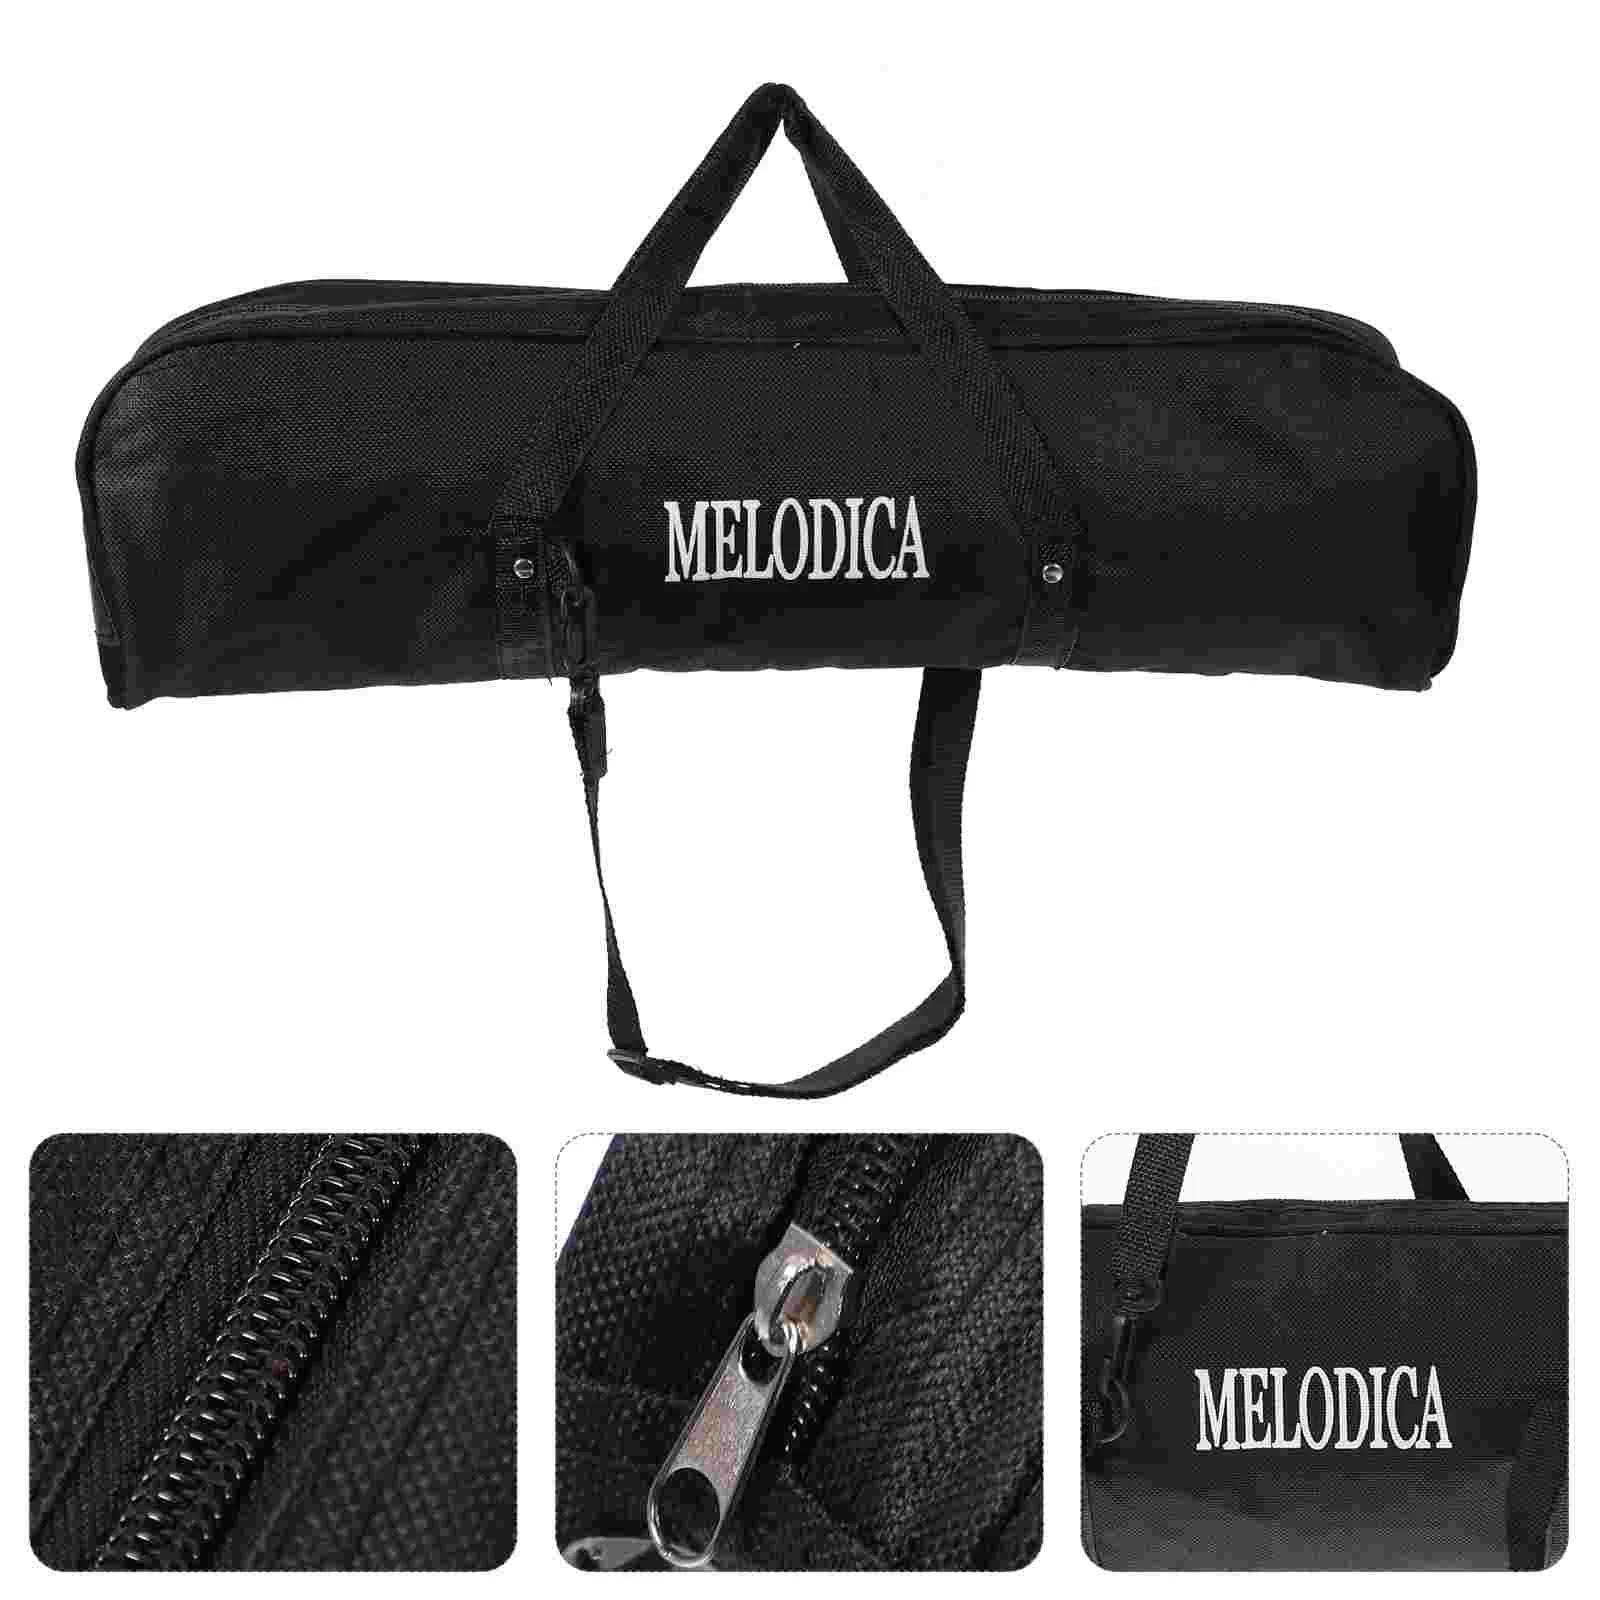 

32 Key Melodica Case Keyboard Piano Storage Bag Gig Musical Instrument with Shoulder Strap Handle for Traval Black